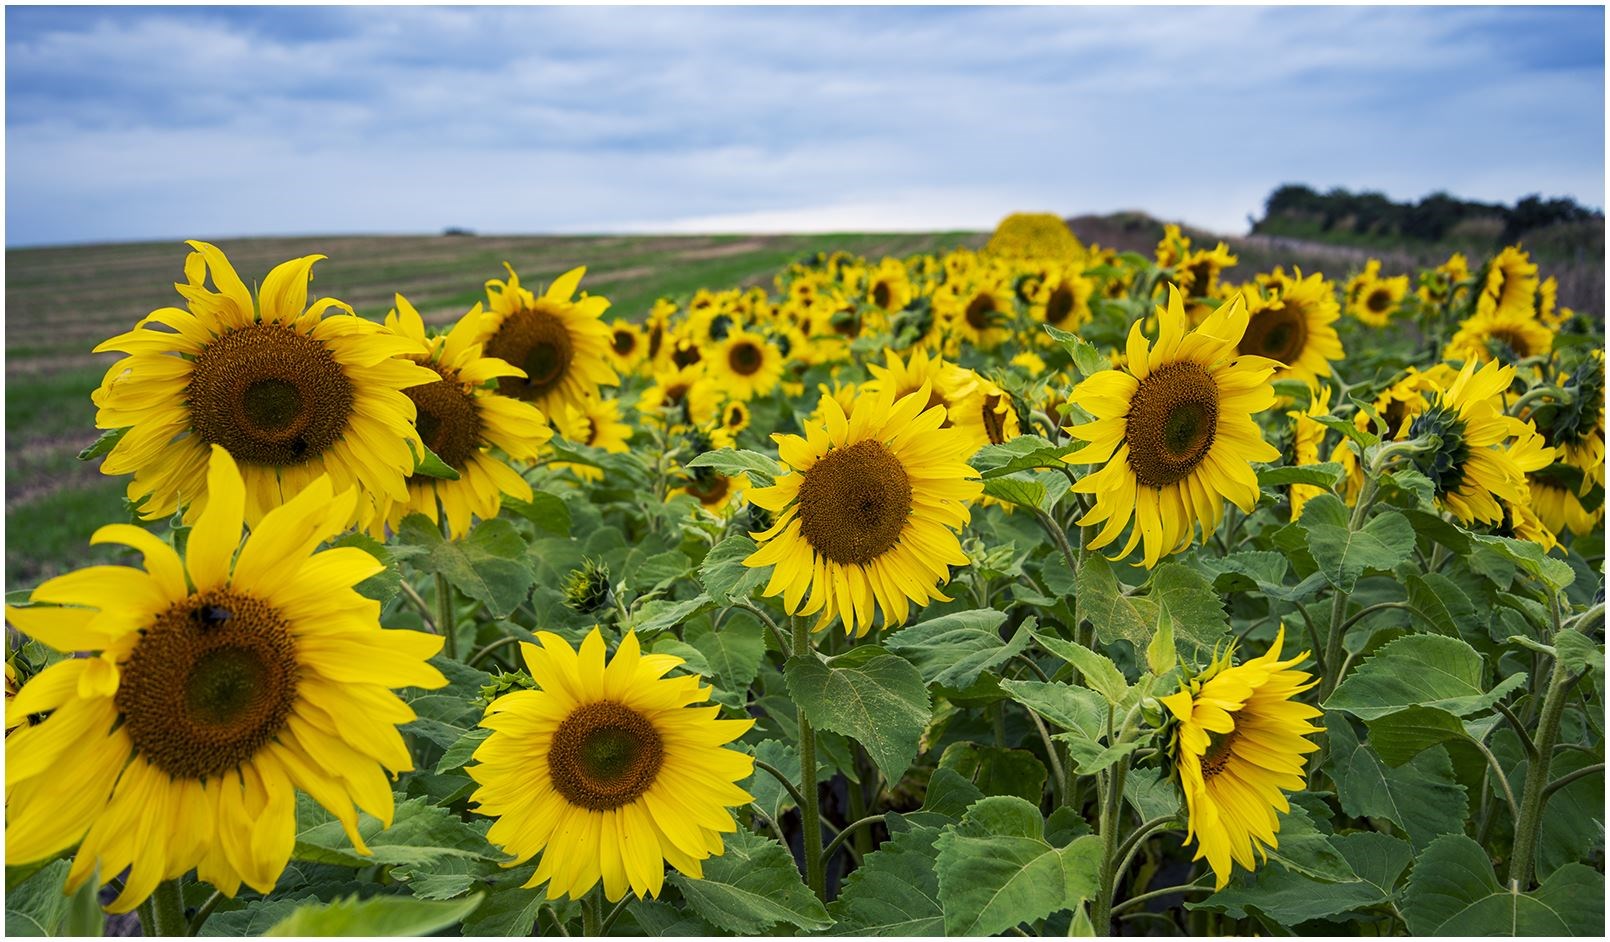 Sunflowers growing in a field at Hilton of Cadboll by Linda Ross.